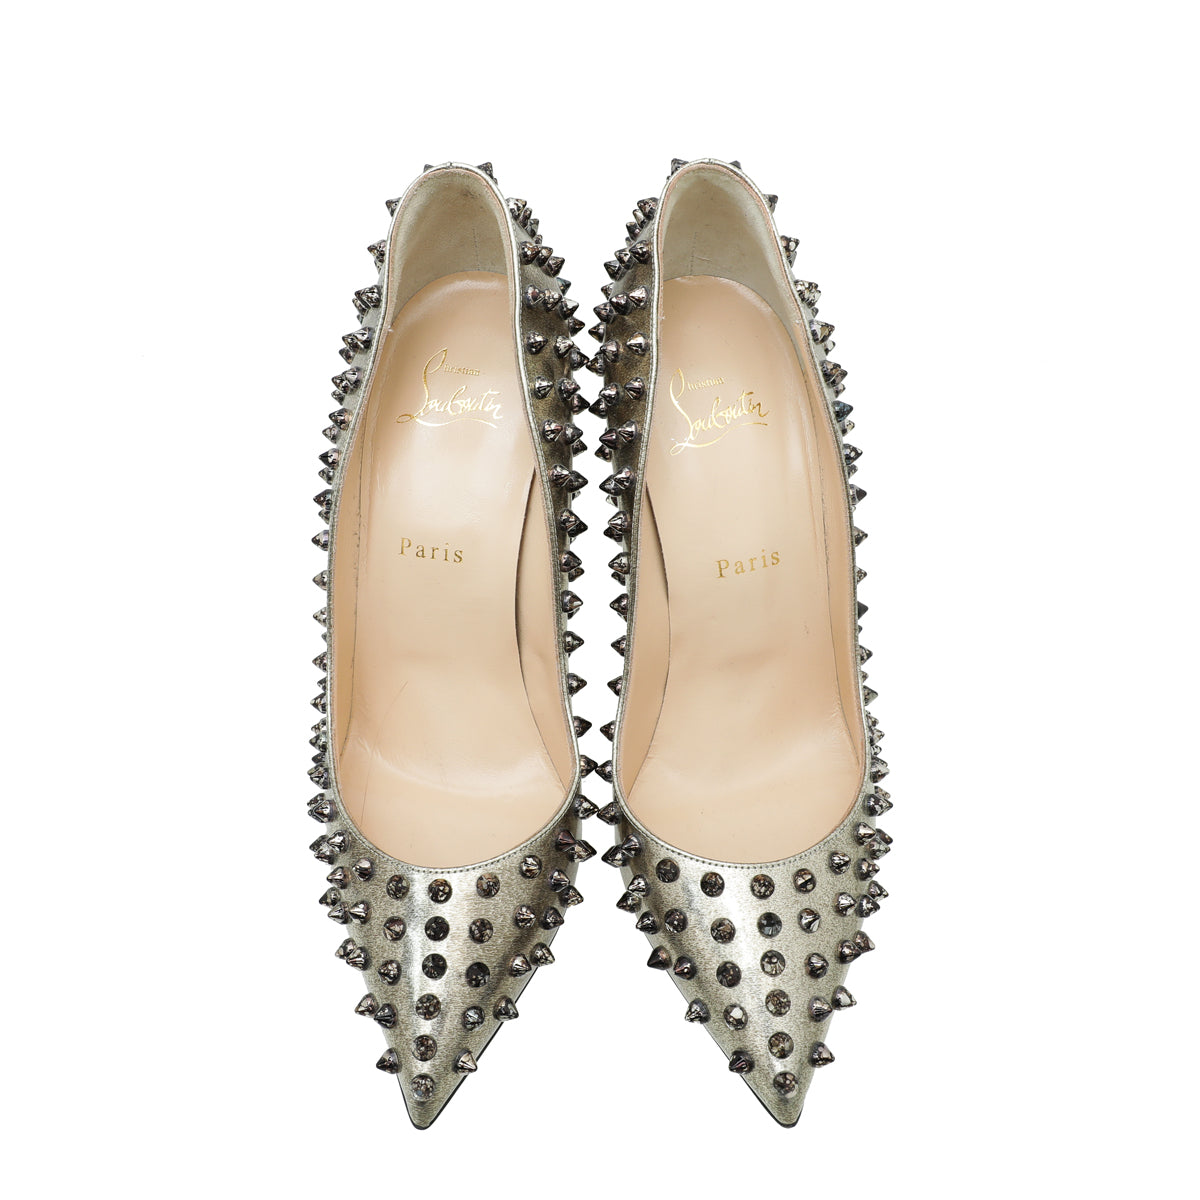 Christian Louboutin Metallic Champagne Spike Pigalle Pump 38.5